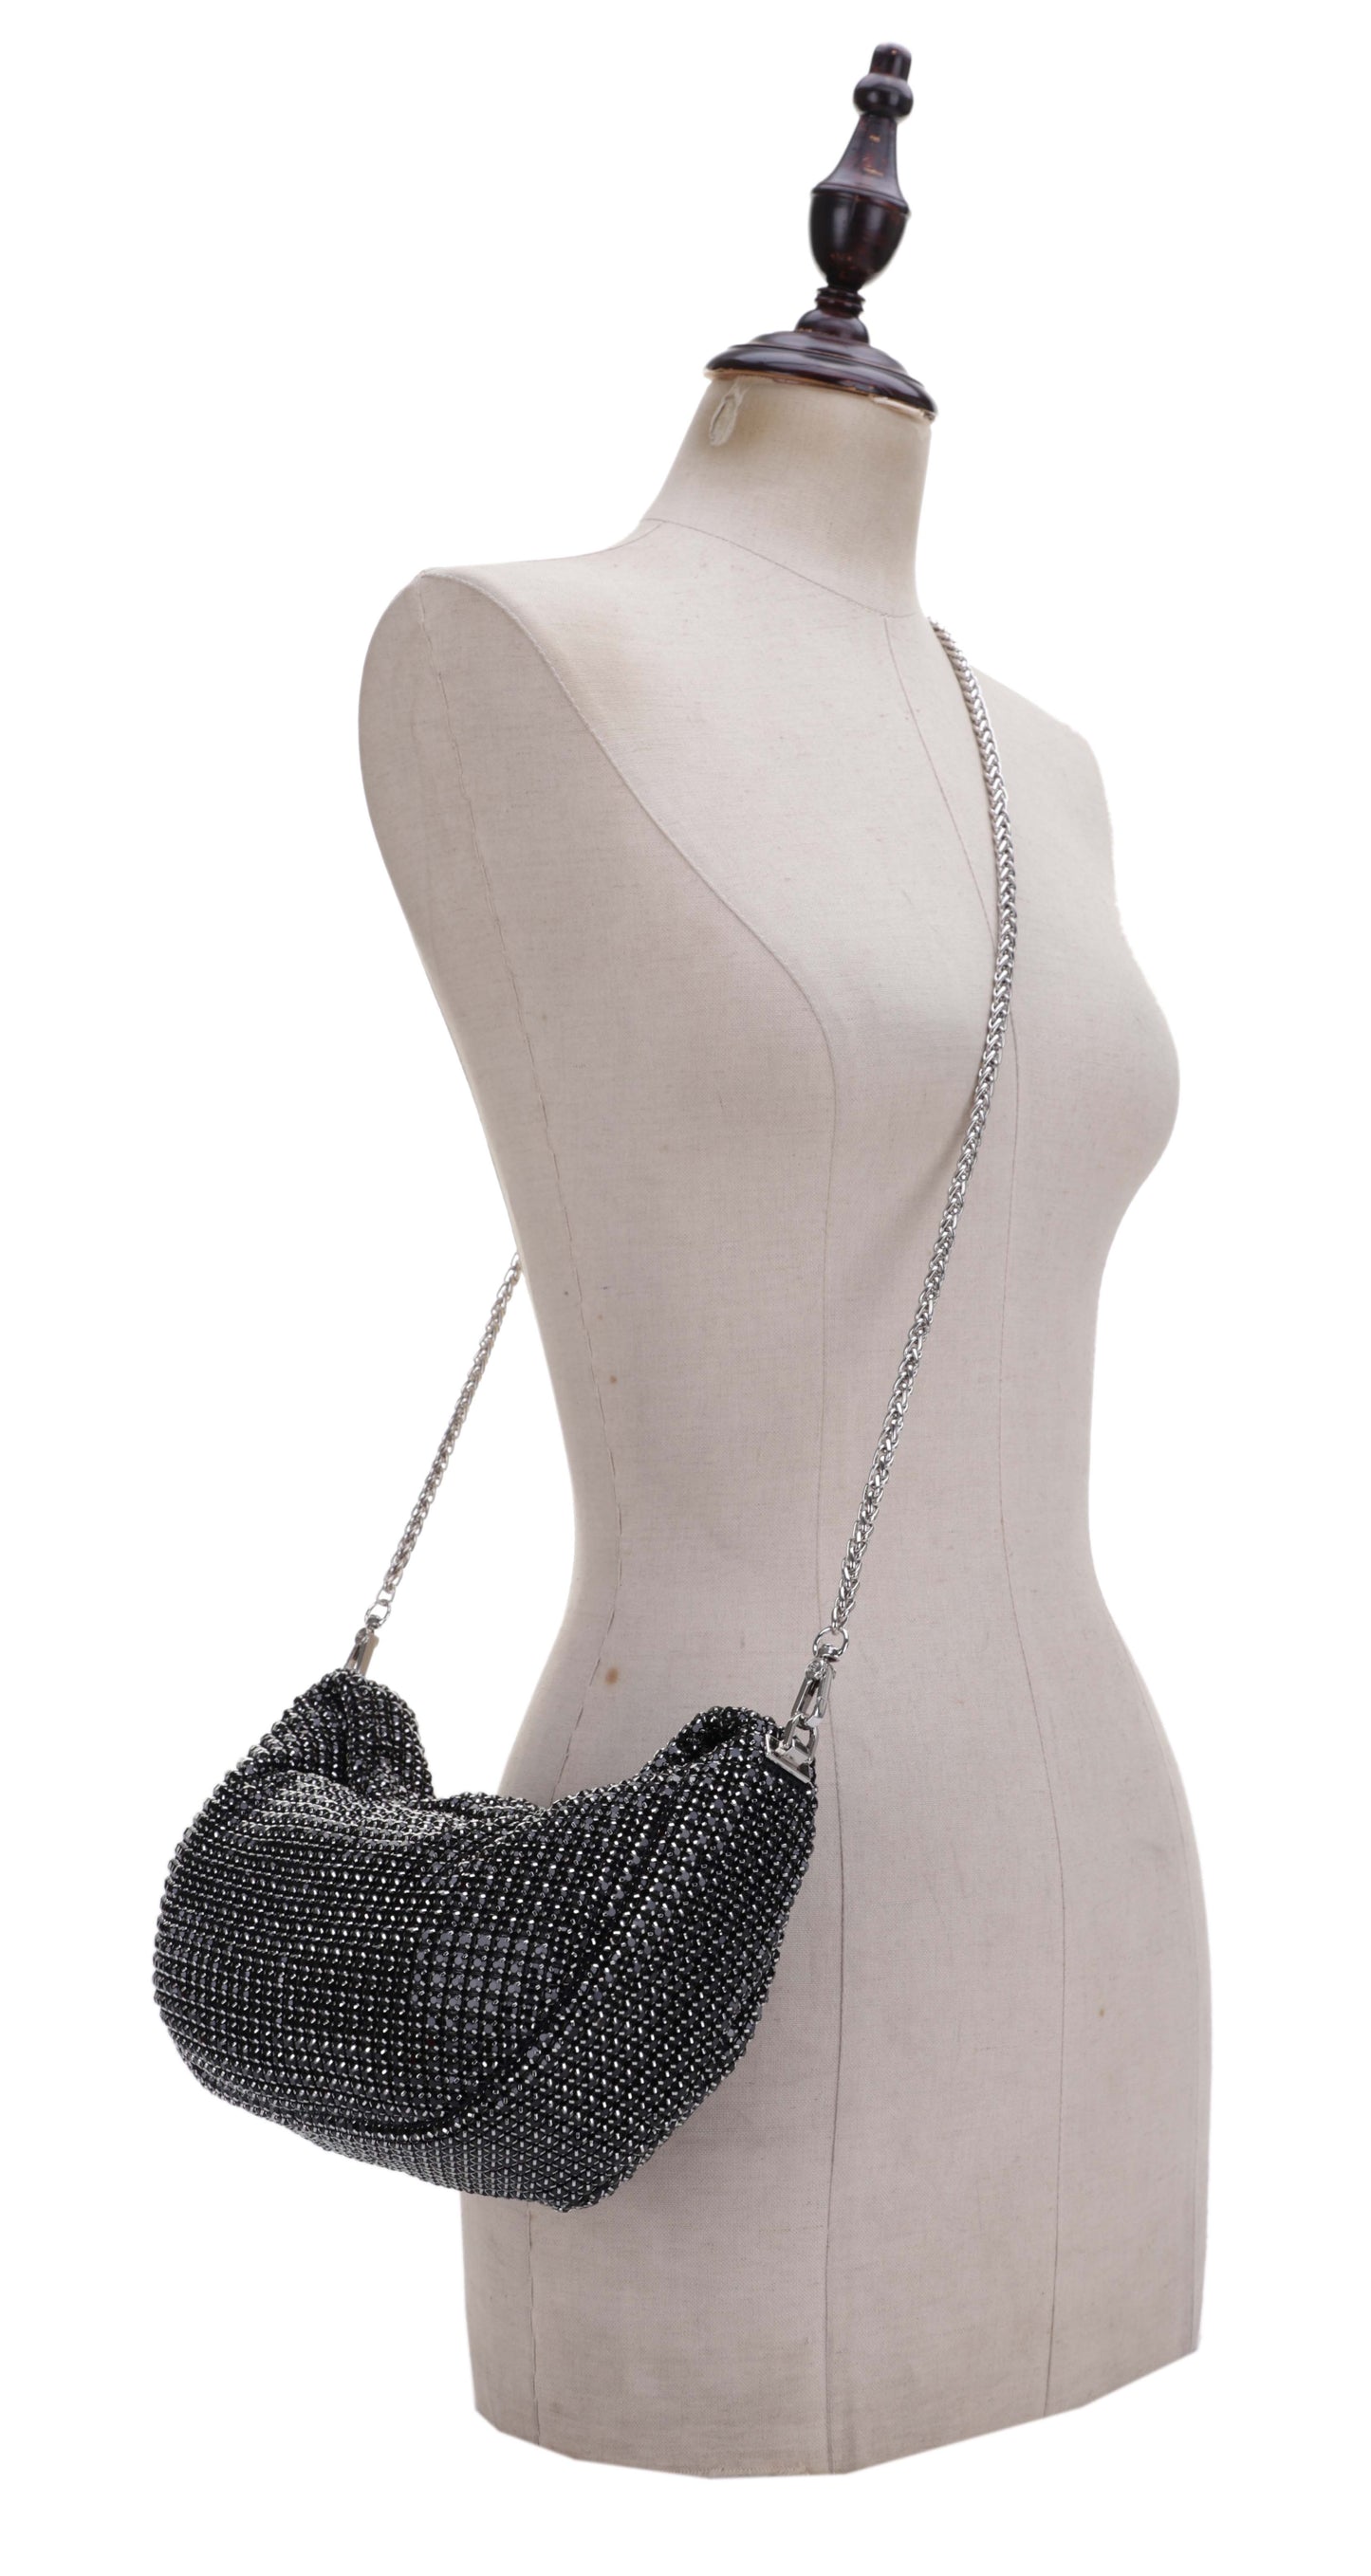 Izzy&Ali Stone Embellished Evening Hobo Bag with Chain Strap